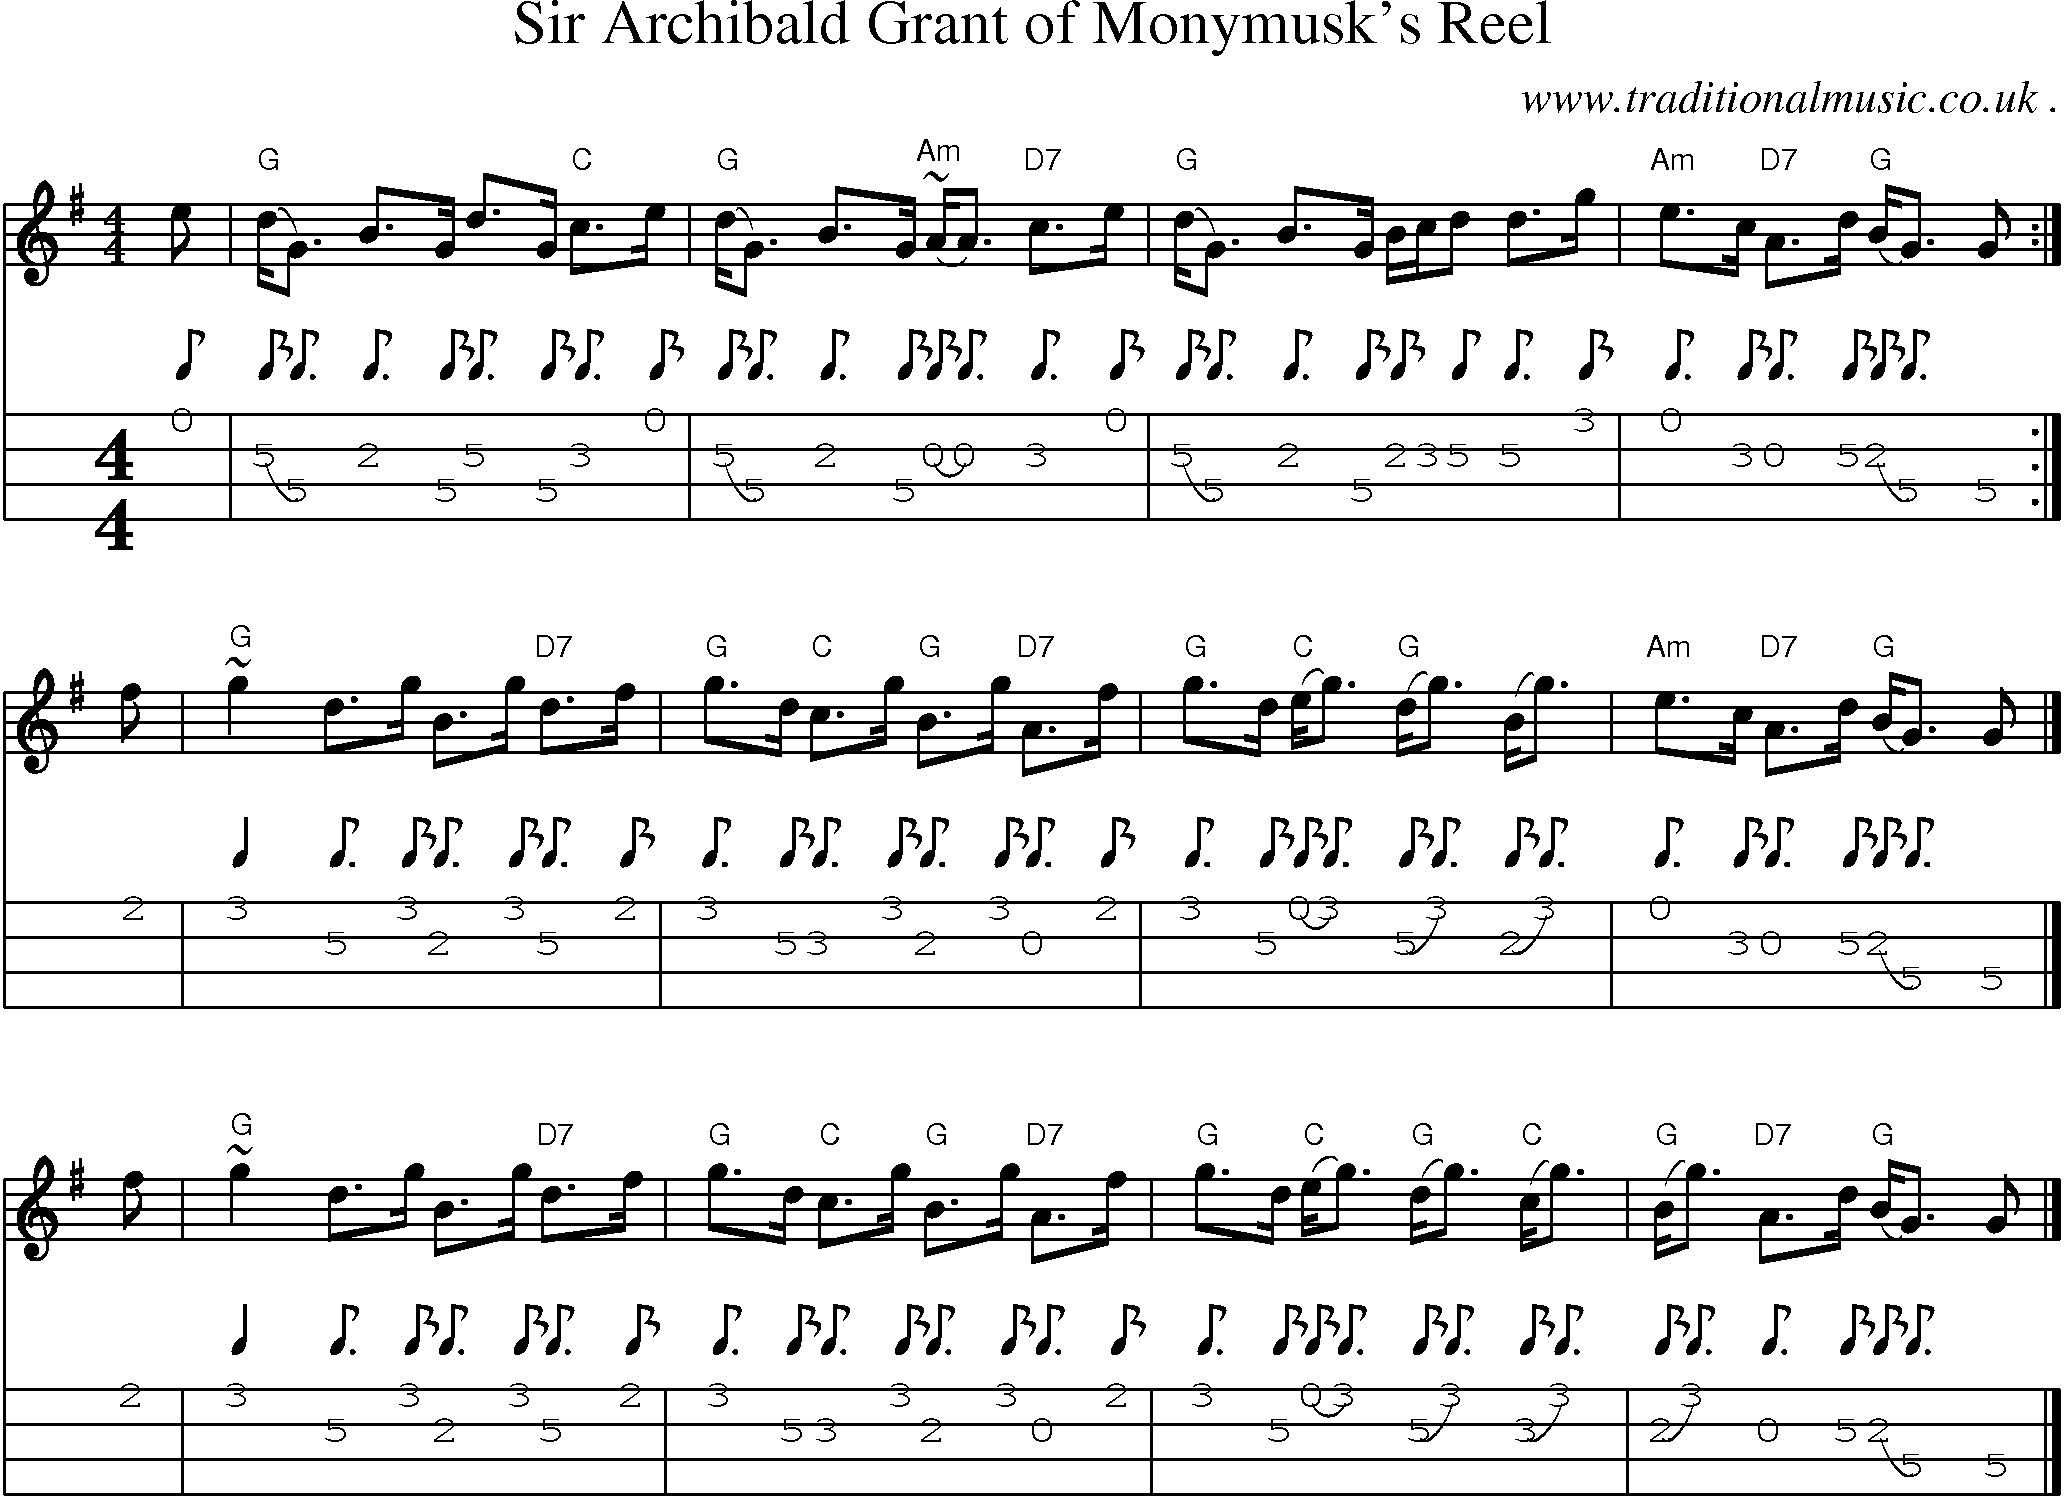 Sheet-music  score, Chords and Mandolin Tabs for Sir Archibald Grant Of Monymusks Reel